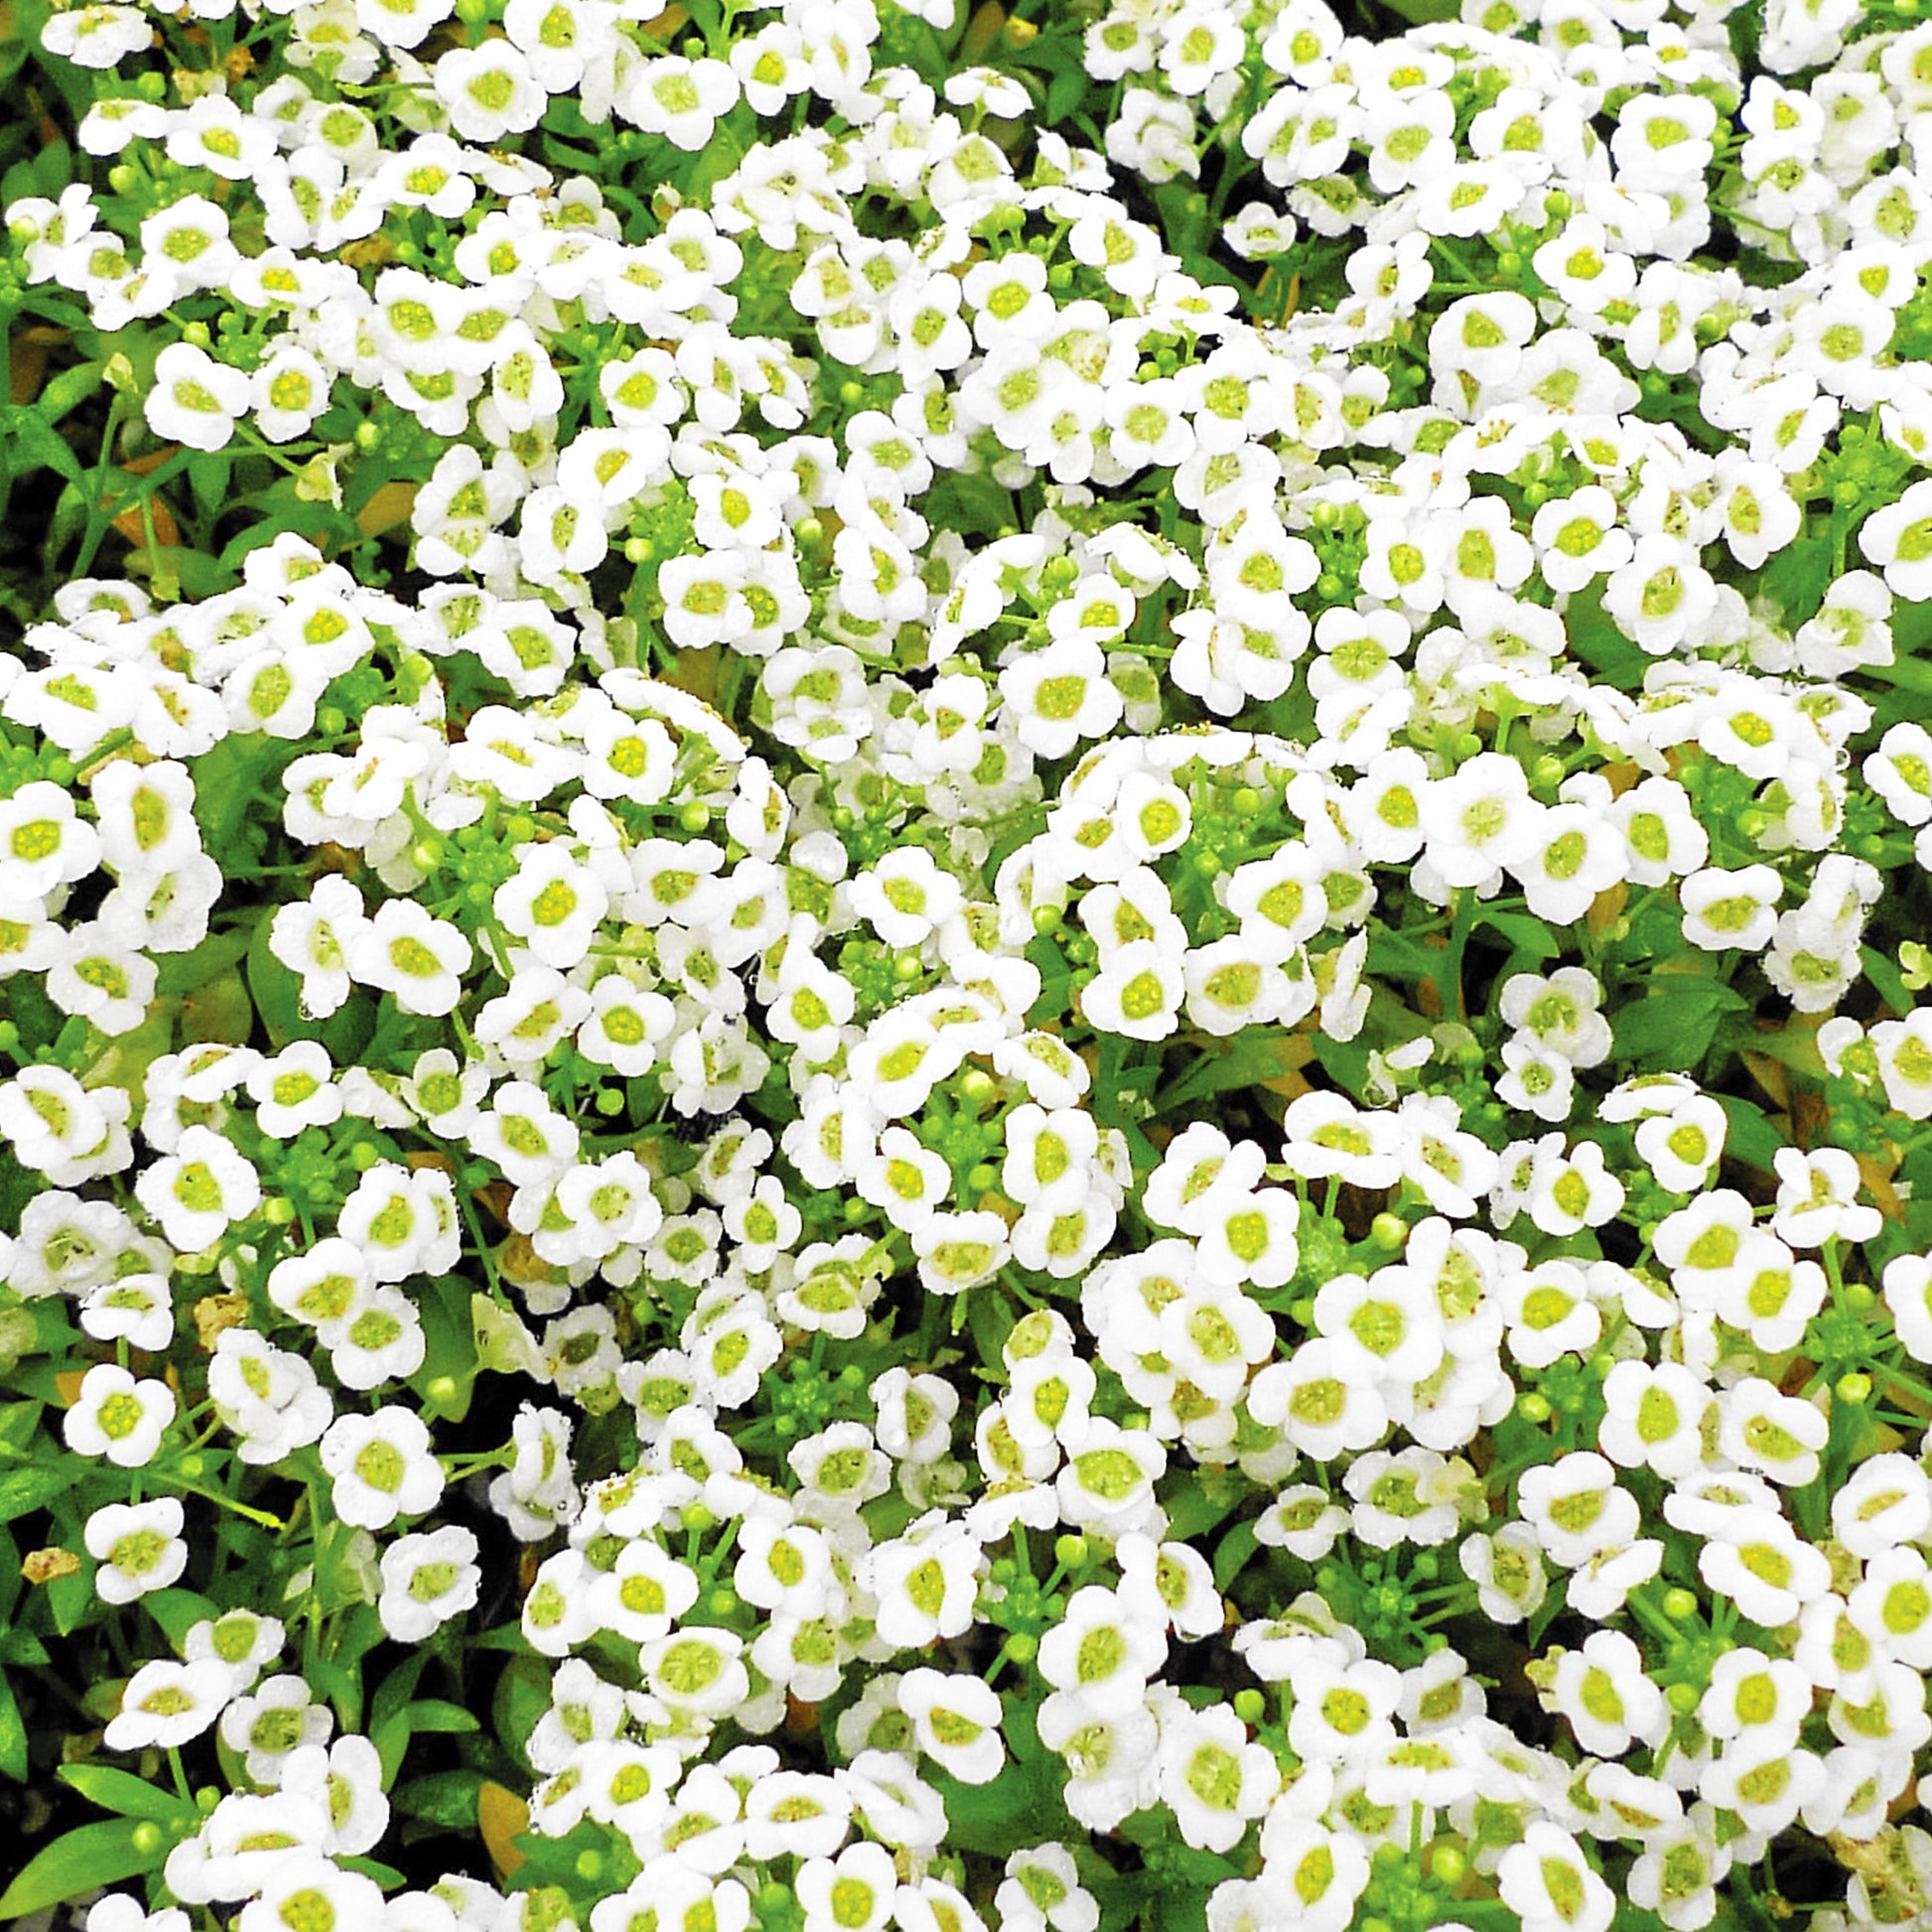 Carpet of Snow alyssum flowers blooming in their tiny beautiful white clusters. Matured plant is displayed.